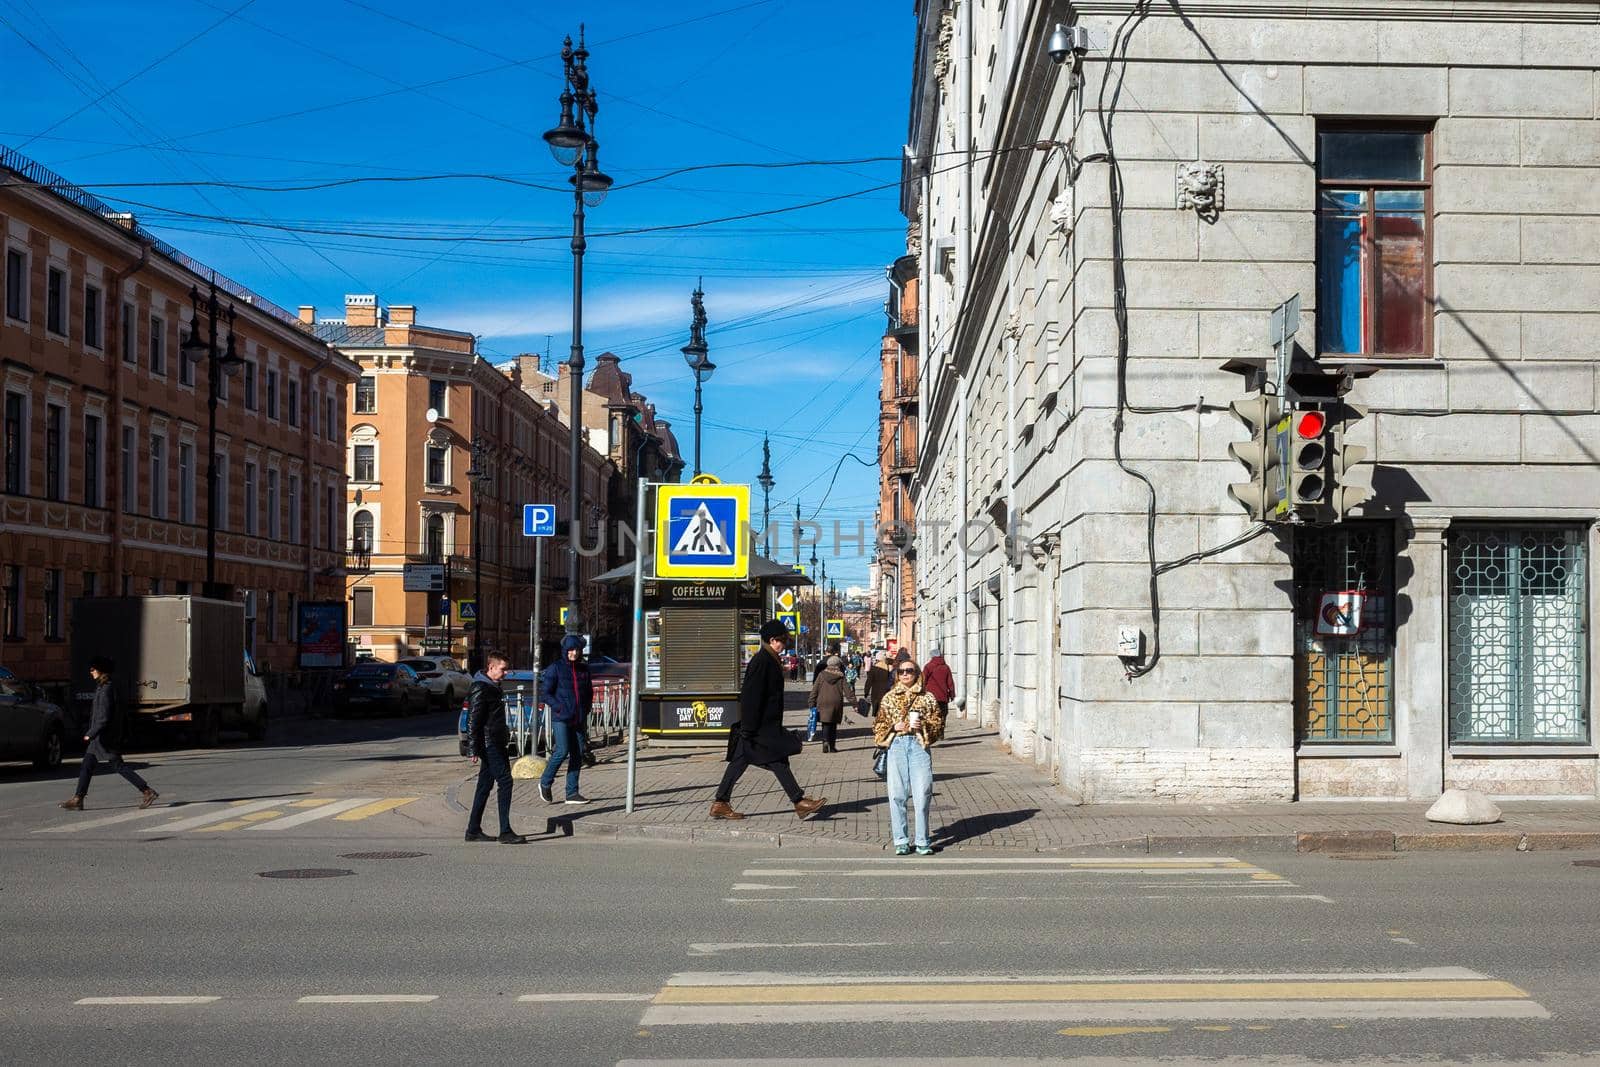 March 30, 2019 St. Petersburg, Russia. Passers-by wait for a permitting traffic light at a pedestrian crossing at a busy intersection in the city center.